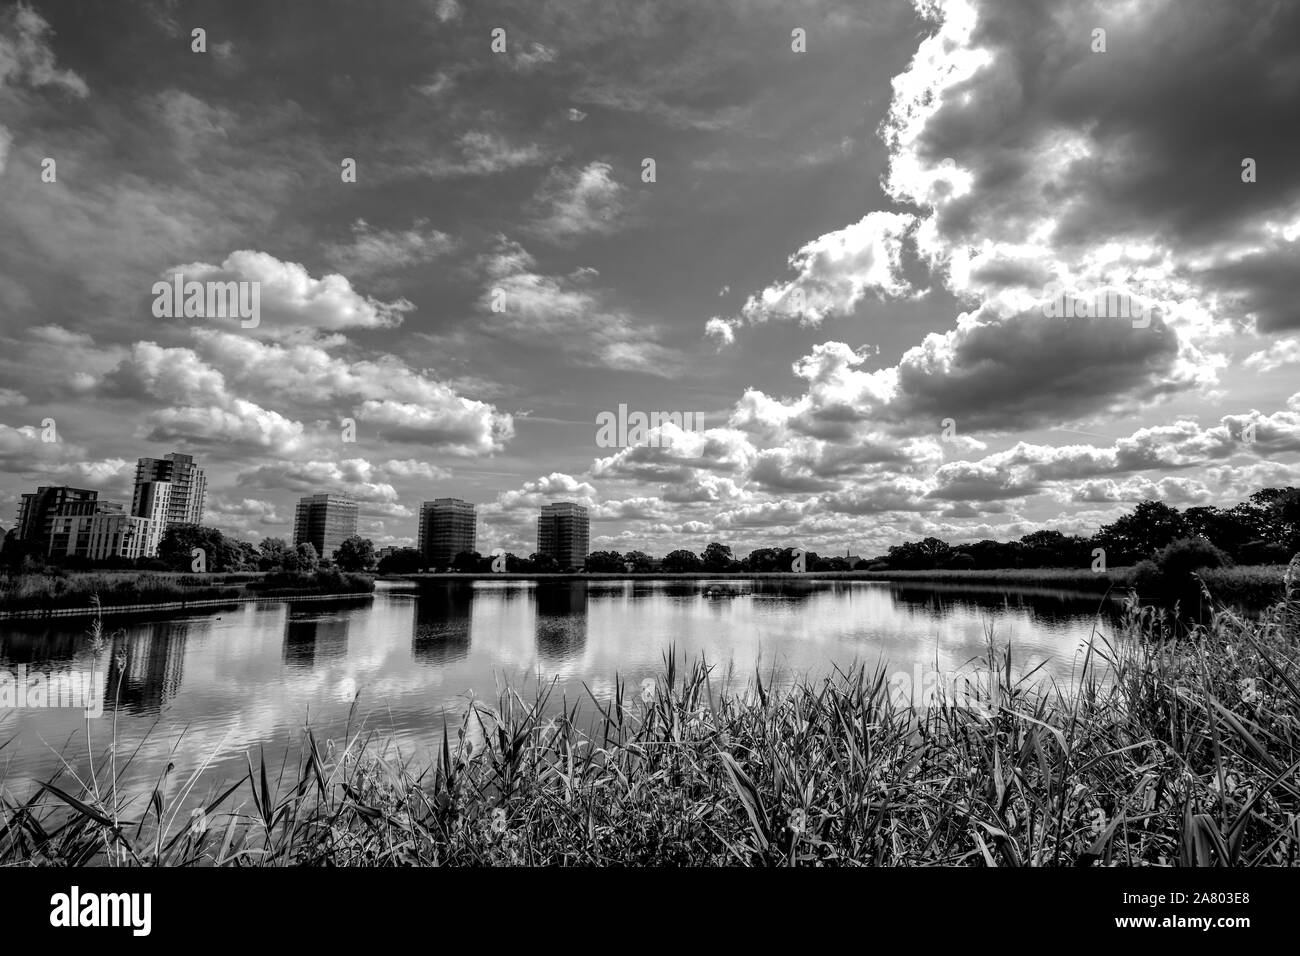 Woodberry Wetlands, Stoke Newington, London. Lake with grass in the foreground, buildings in the background, moody clouds in the sky and reflections. Stock Photo